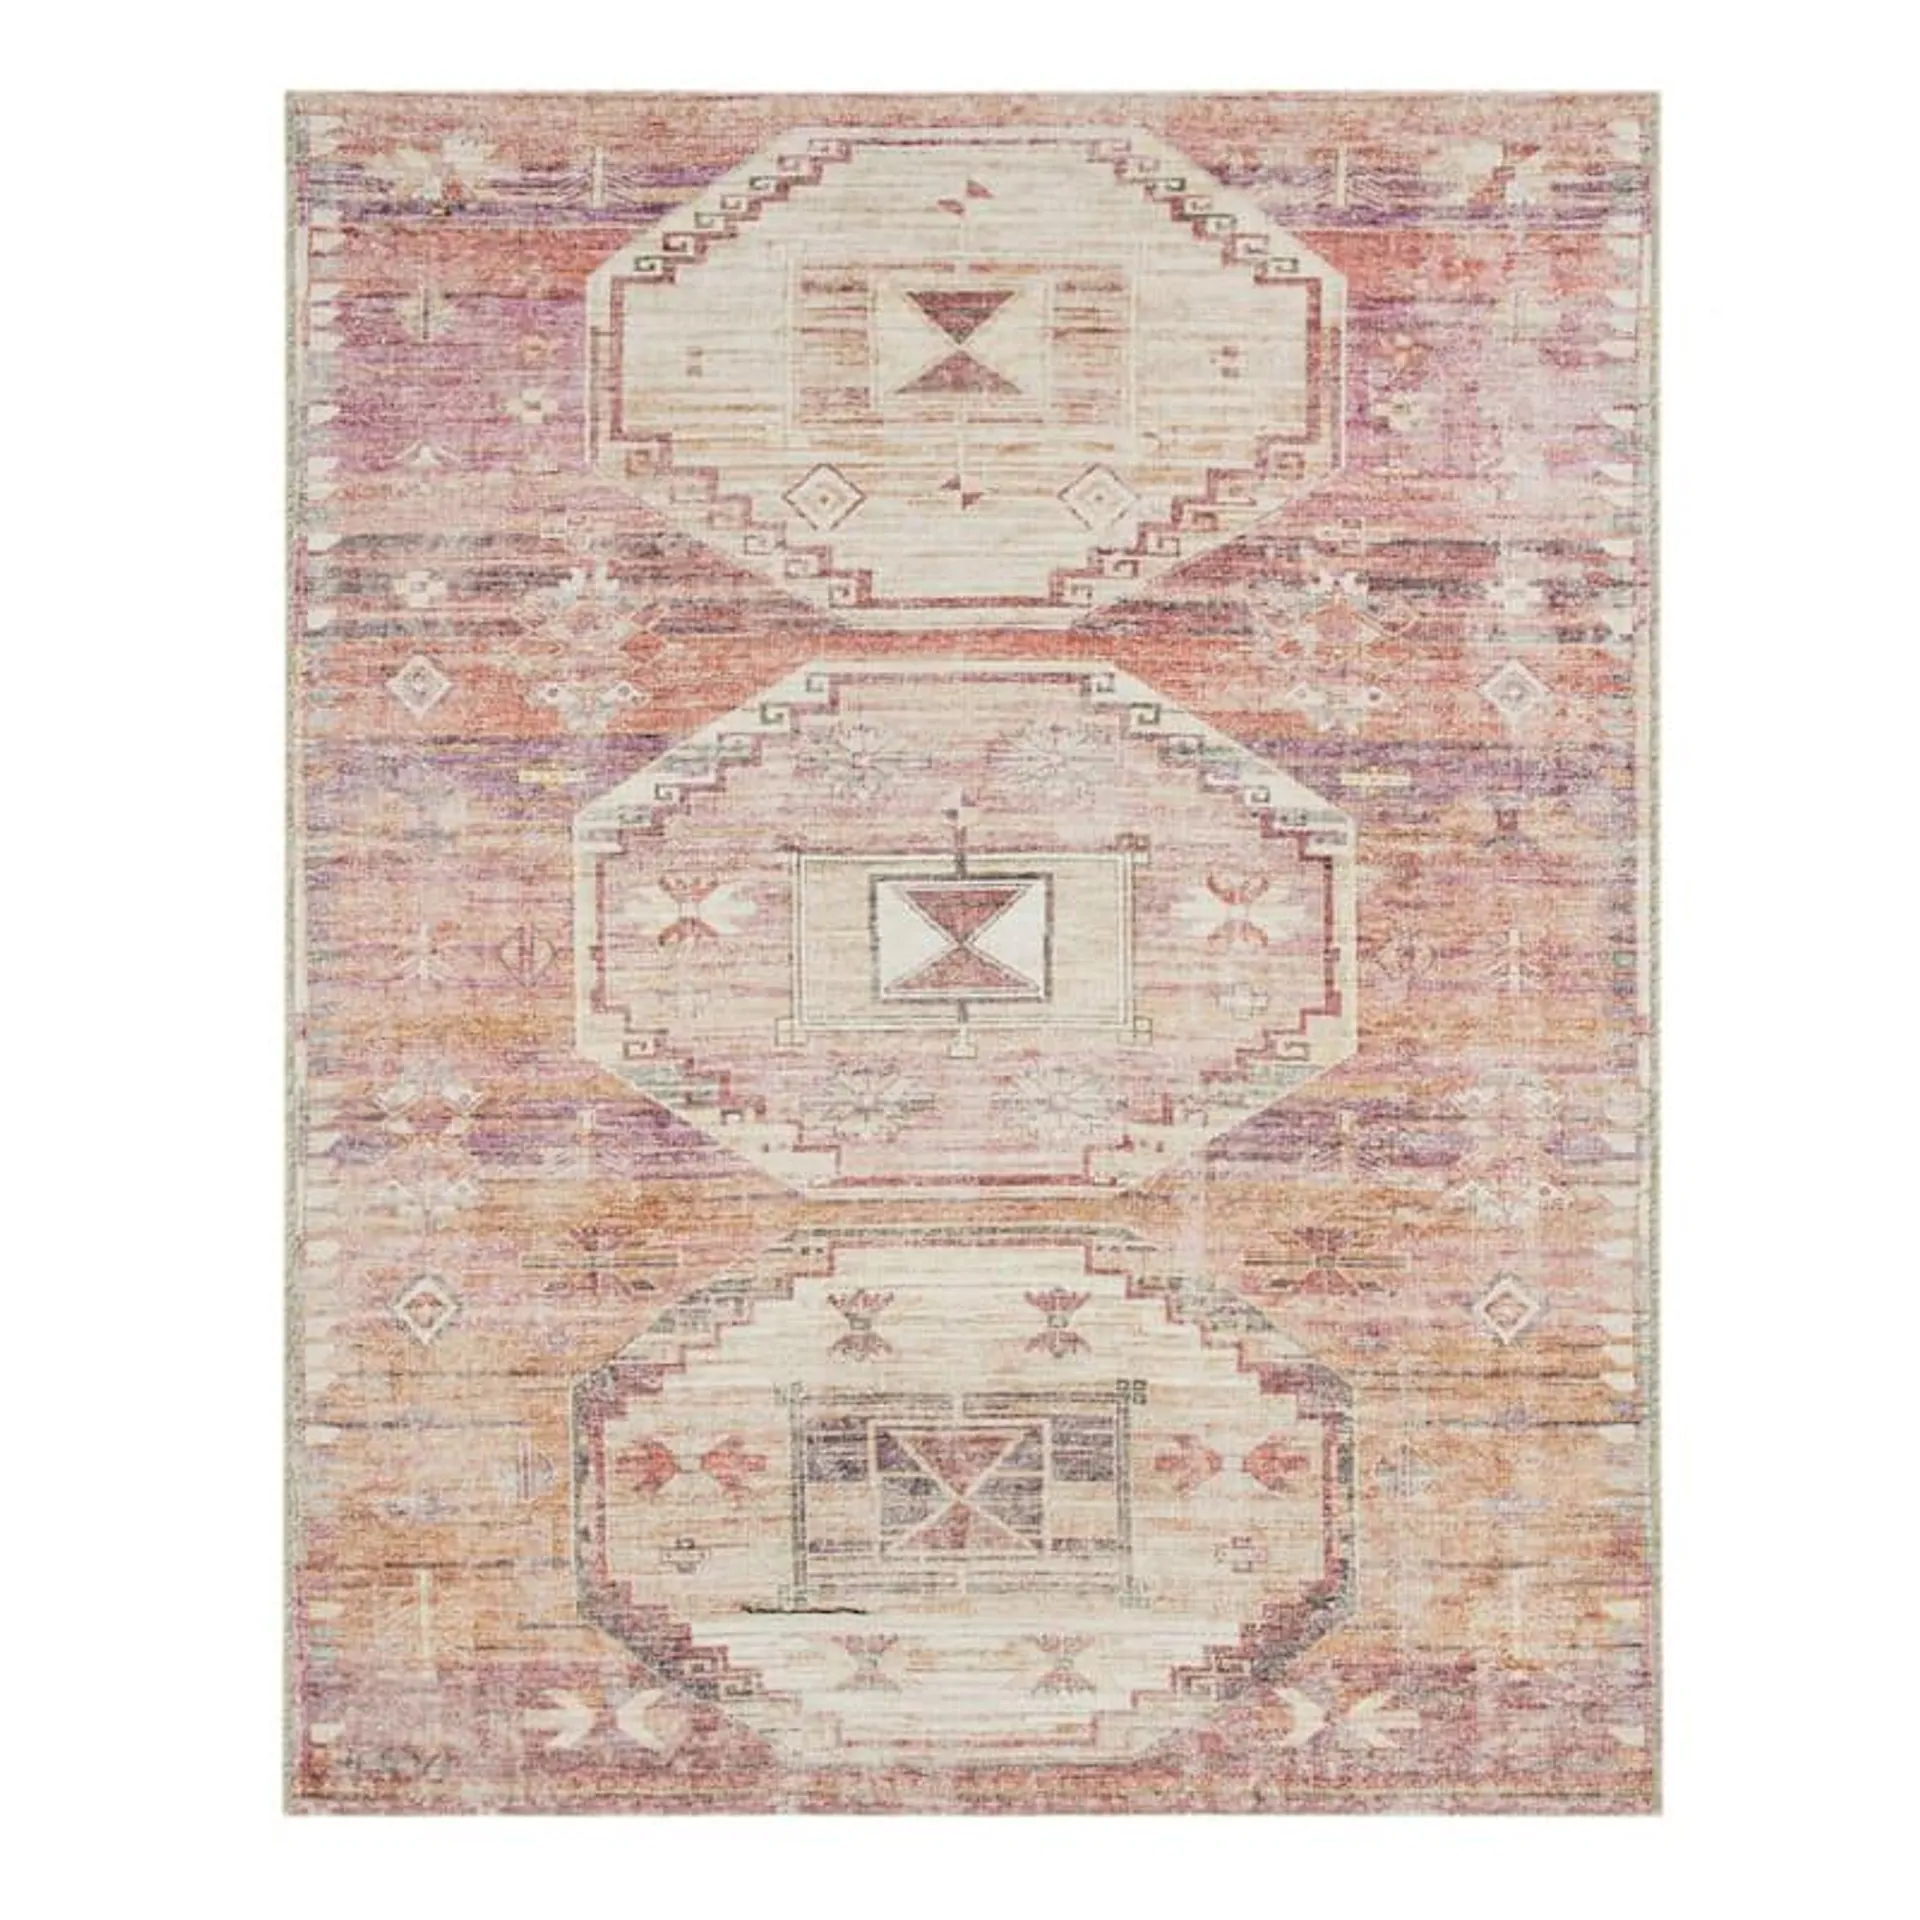 (B826) Red & Pink Tribal Patterned Washable Area Rug, 8x10